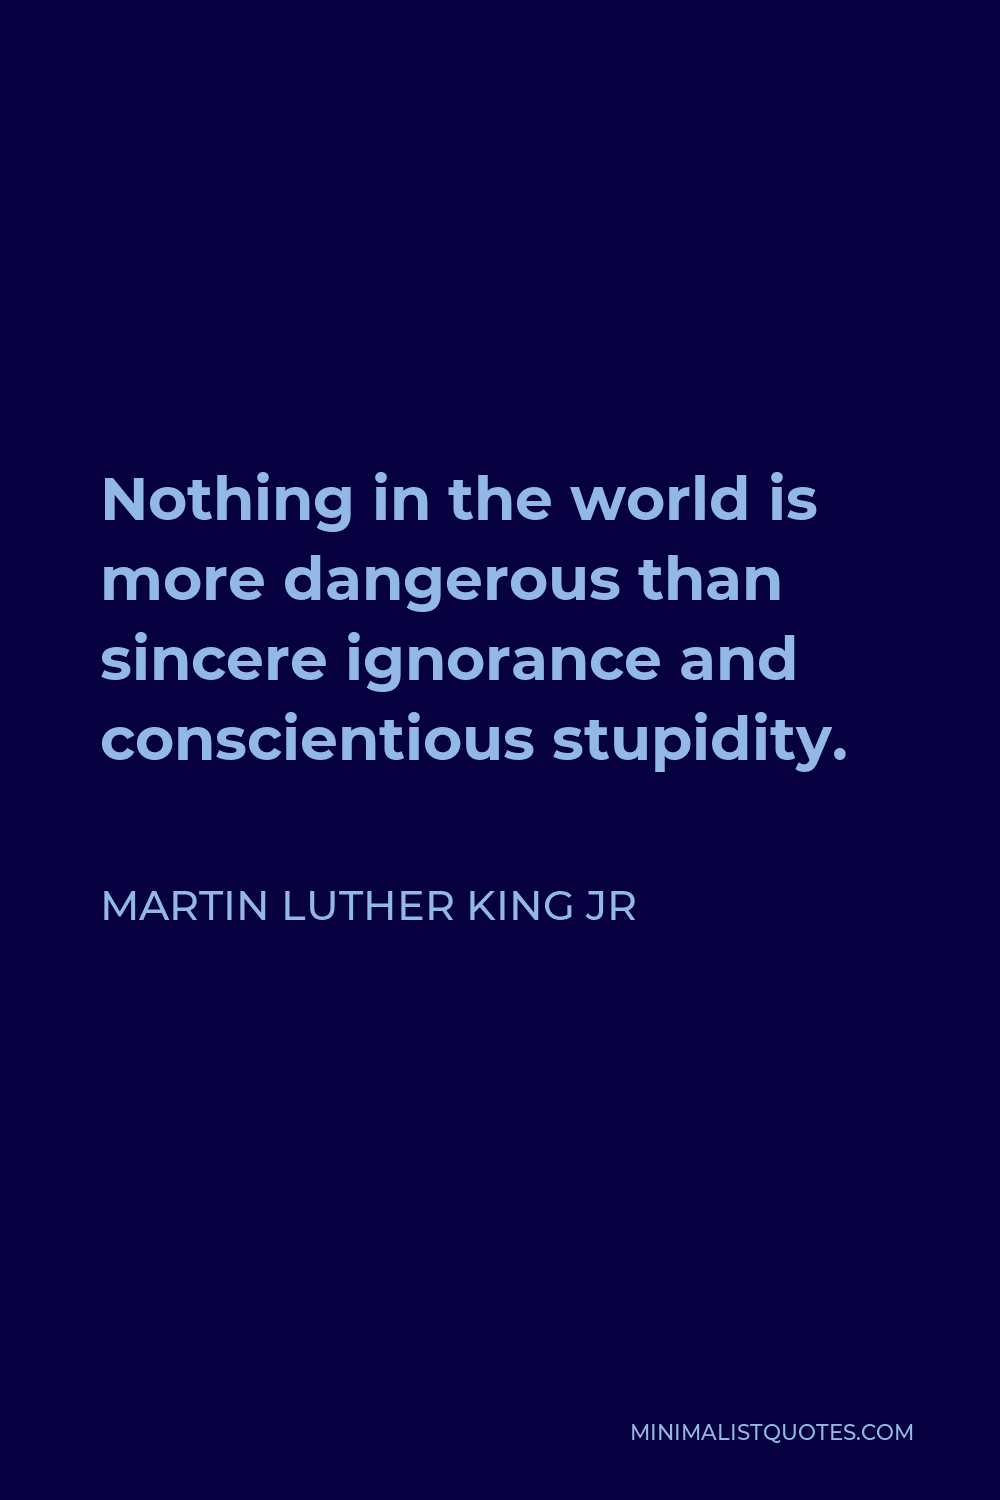 Martin Luther King Jr Quote - Nothing in the world is more dangerous than sincere ignorance and conscientious stupidity.